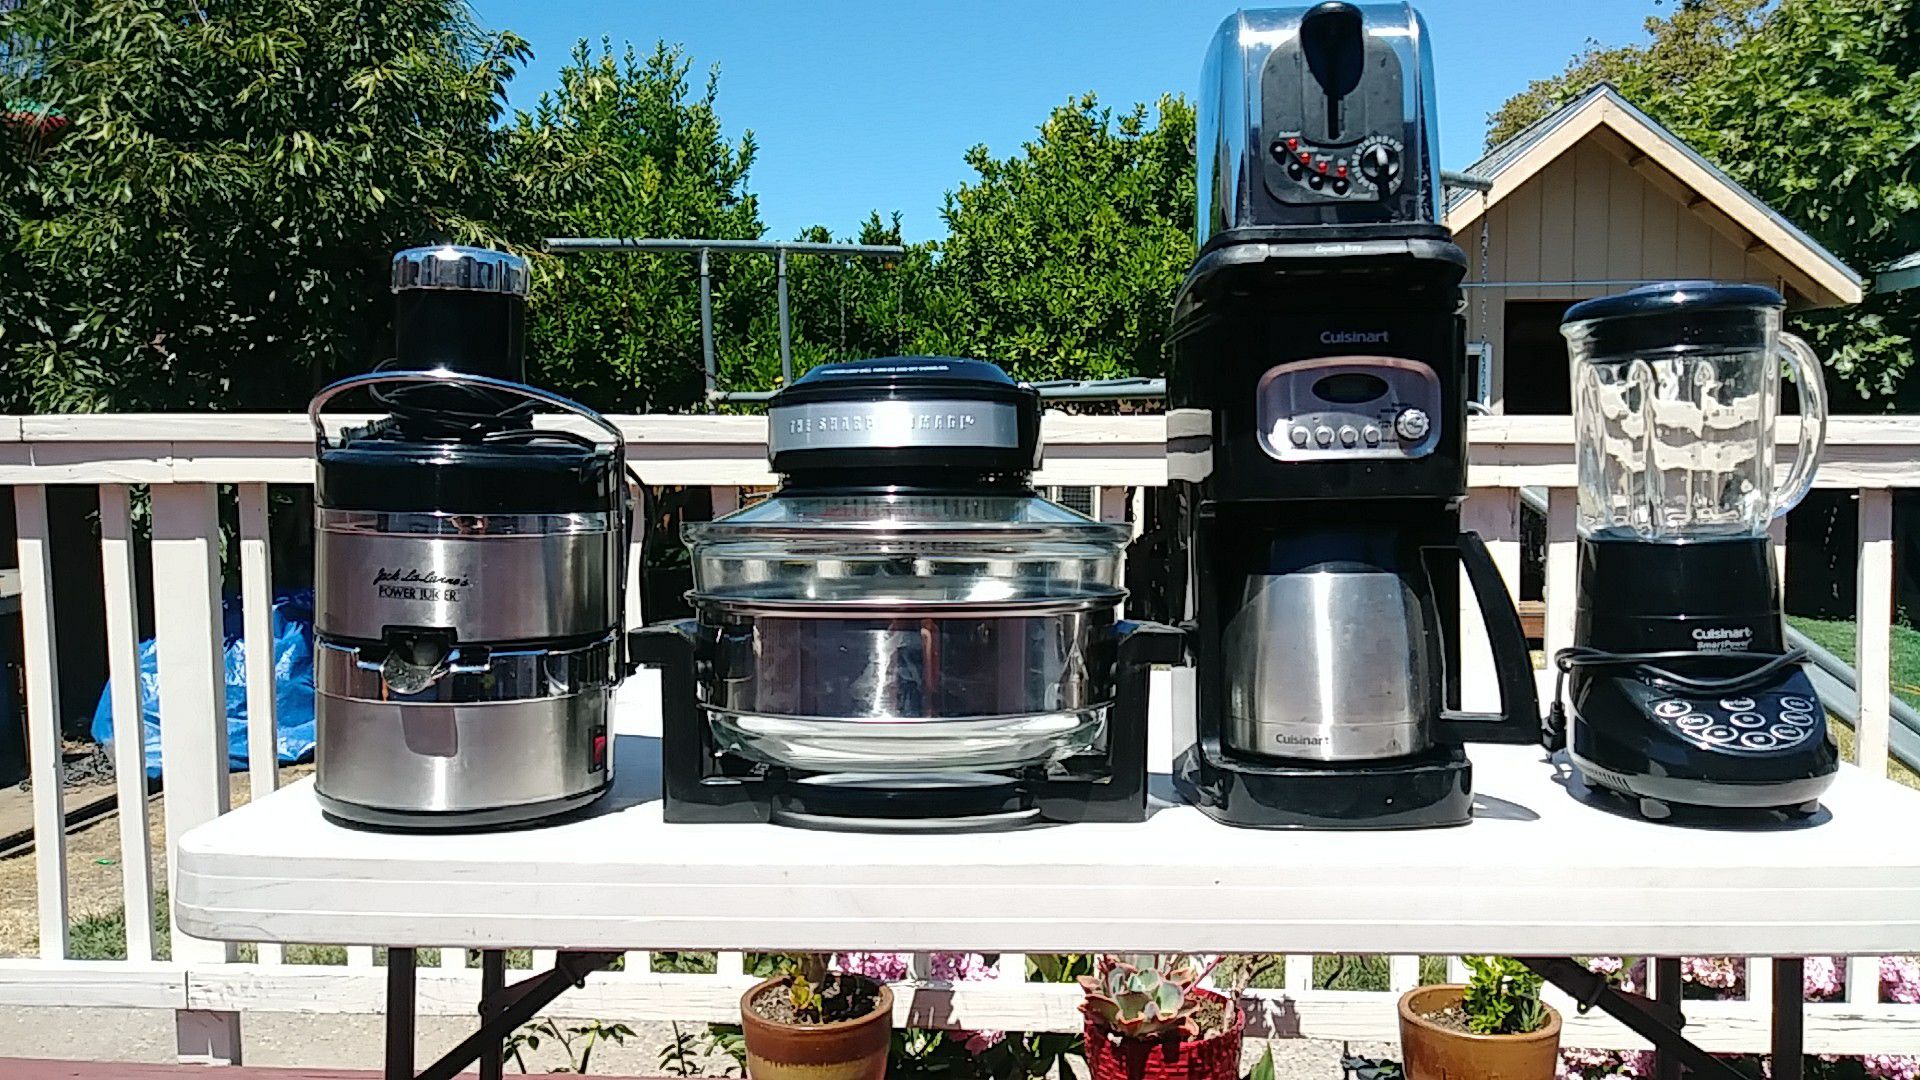 Used kitchen appliances in good condition